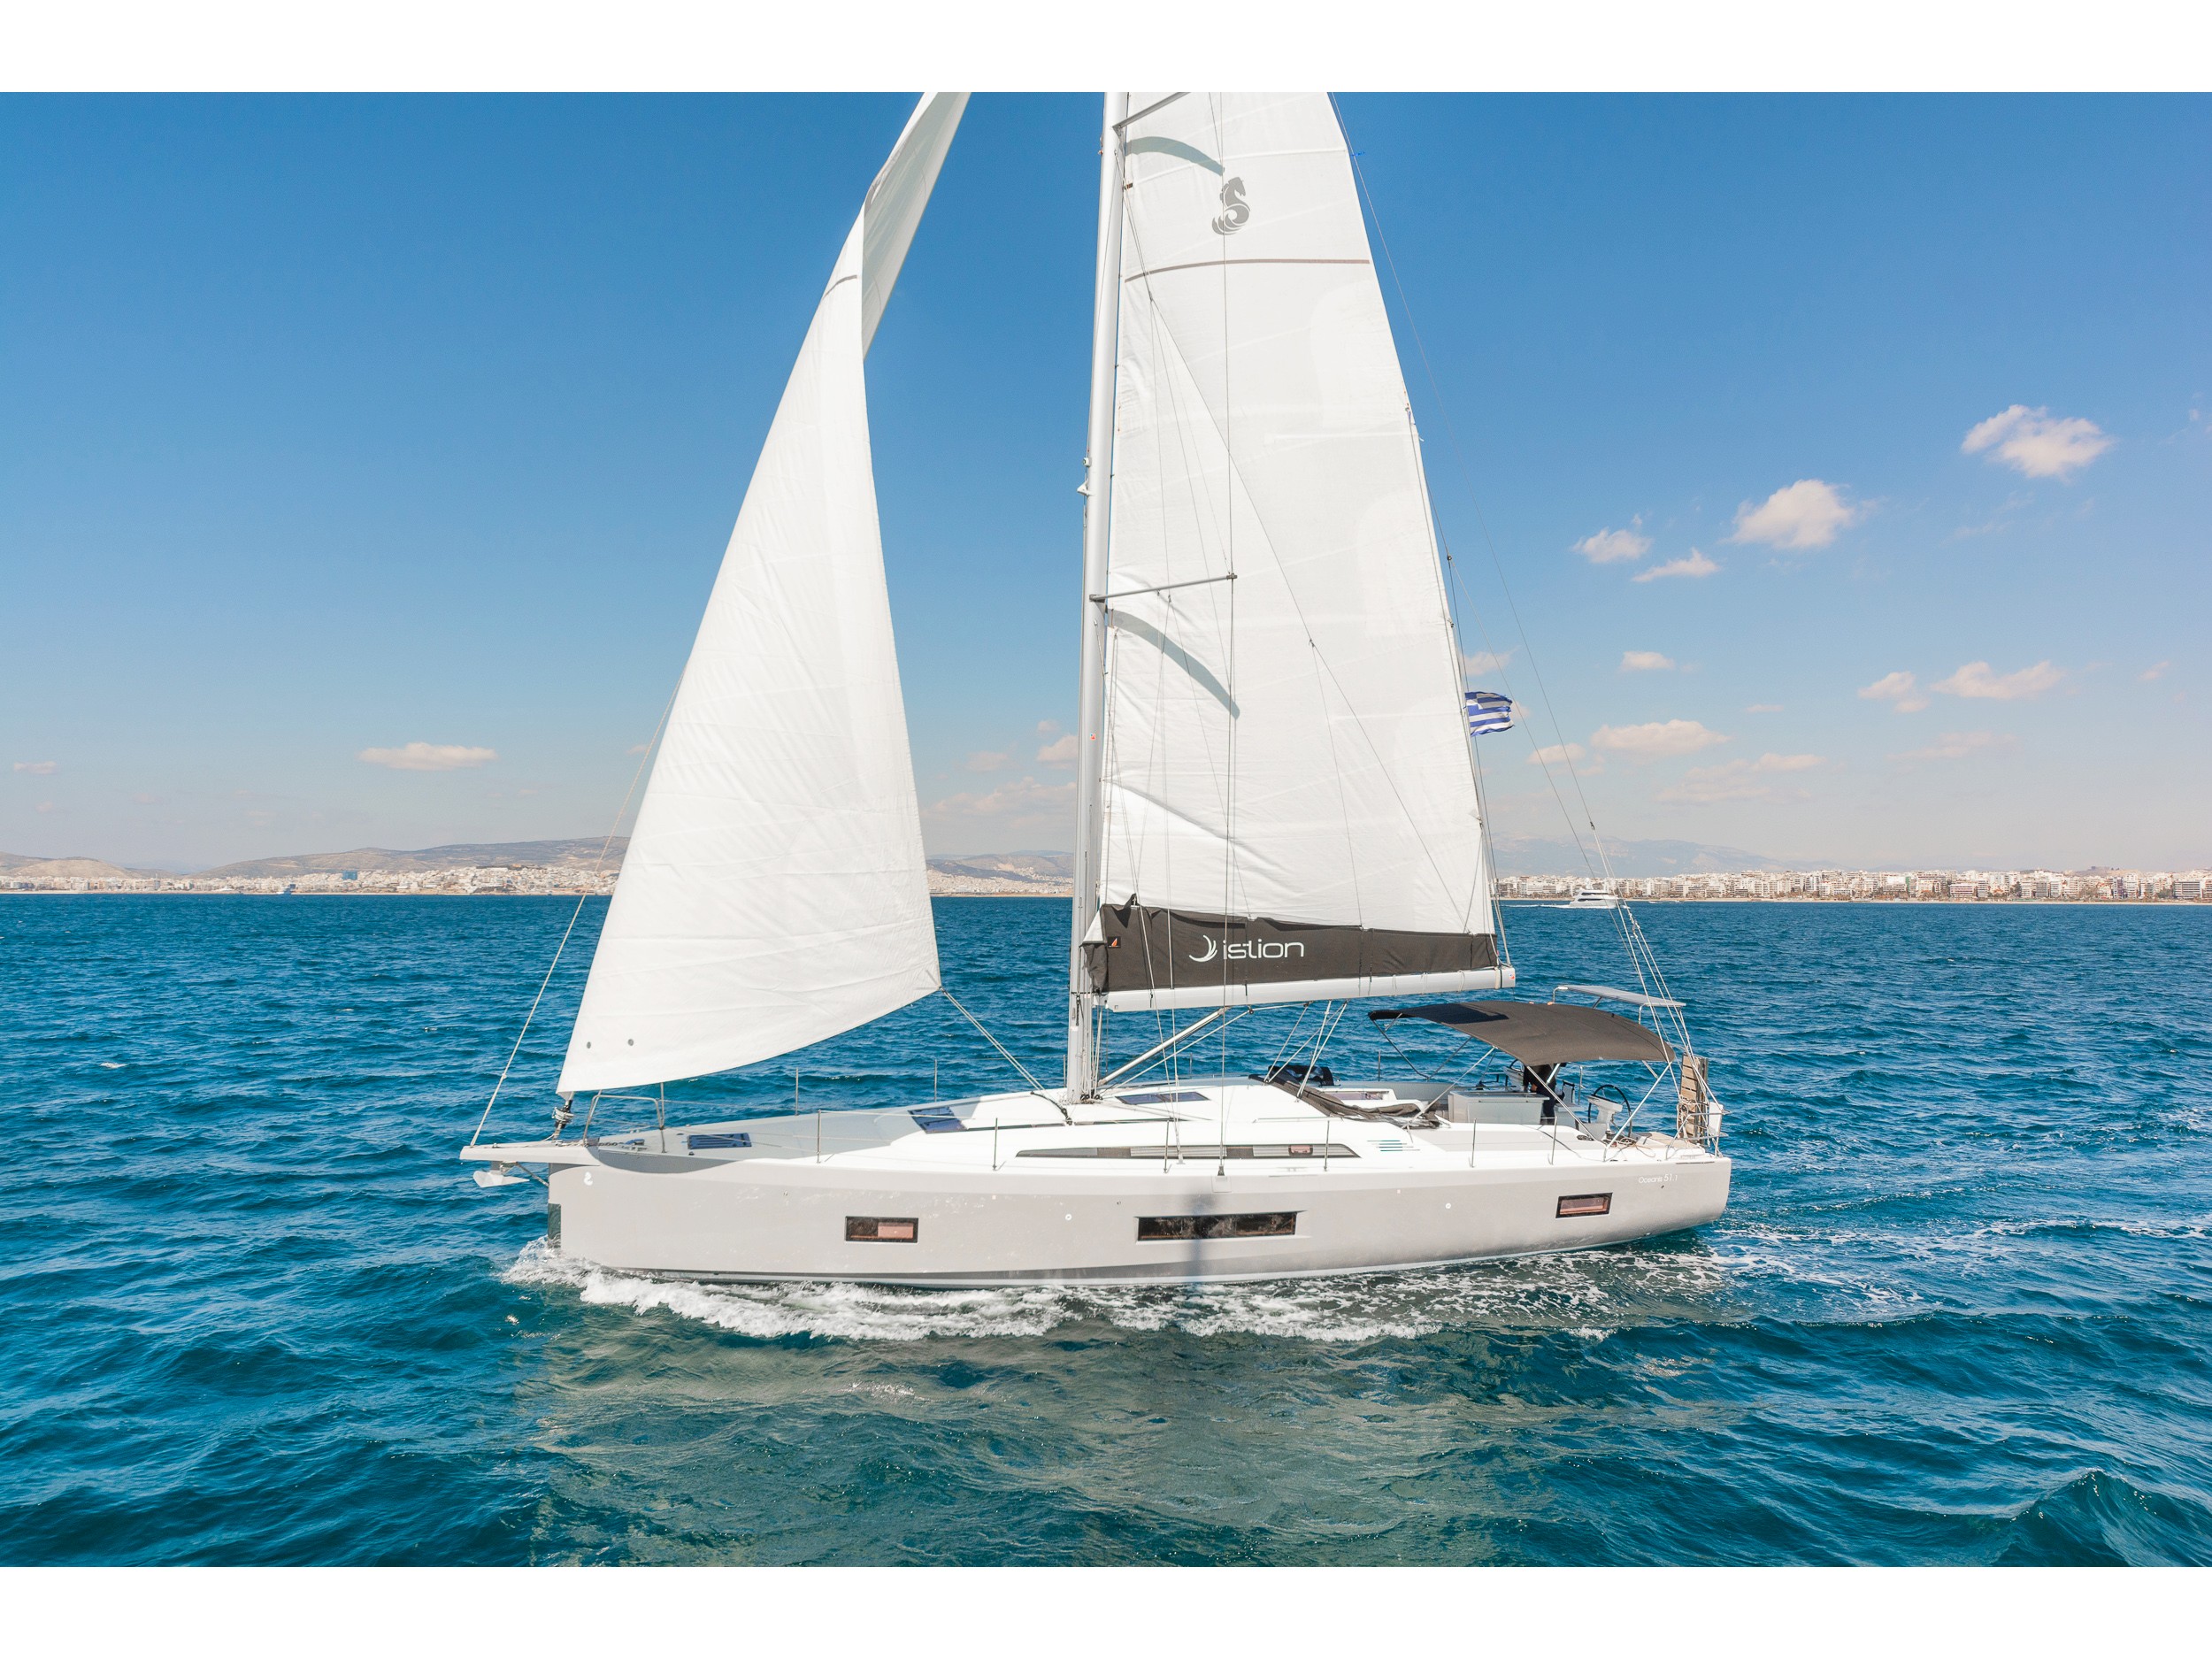 Oceanis 51.1 - Yacht Charter Greece & Boat hire in Greece Dodecanese Rhodes Rhodes Marina 2